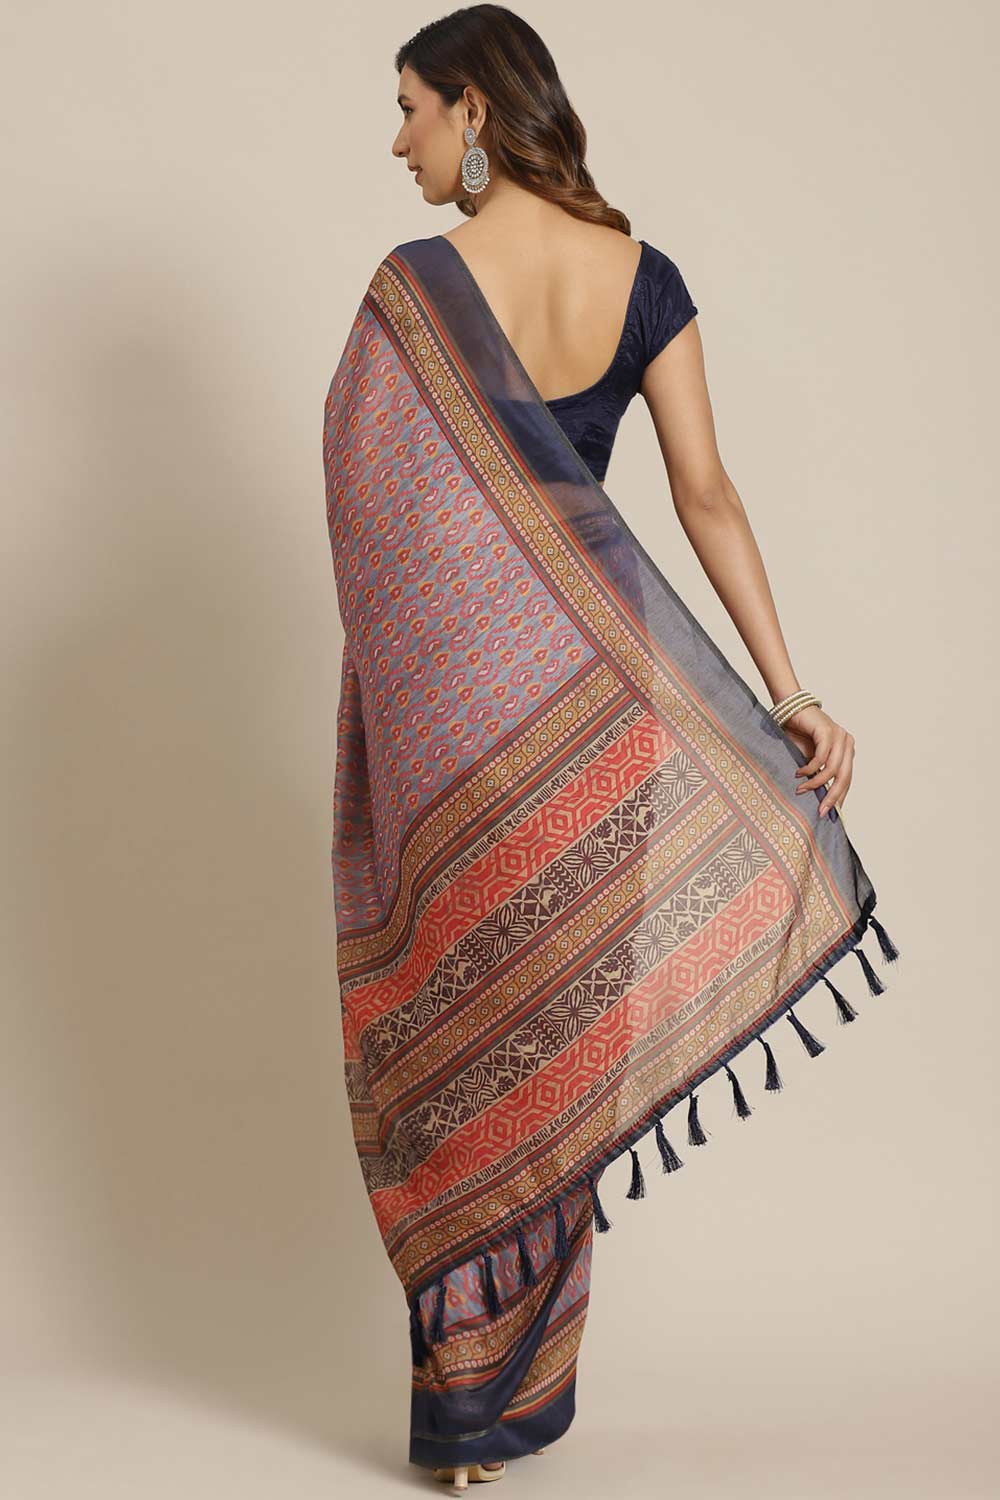 Shop Julia Grey Cotton Block Printed One Minute Saree at best offer at our  Store - One Minute Saree